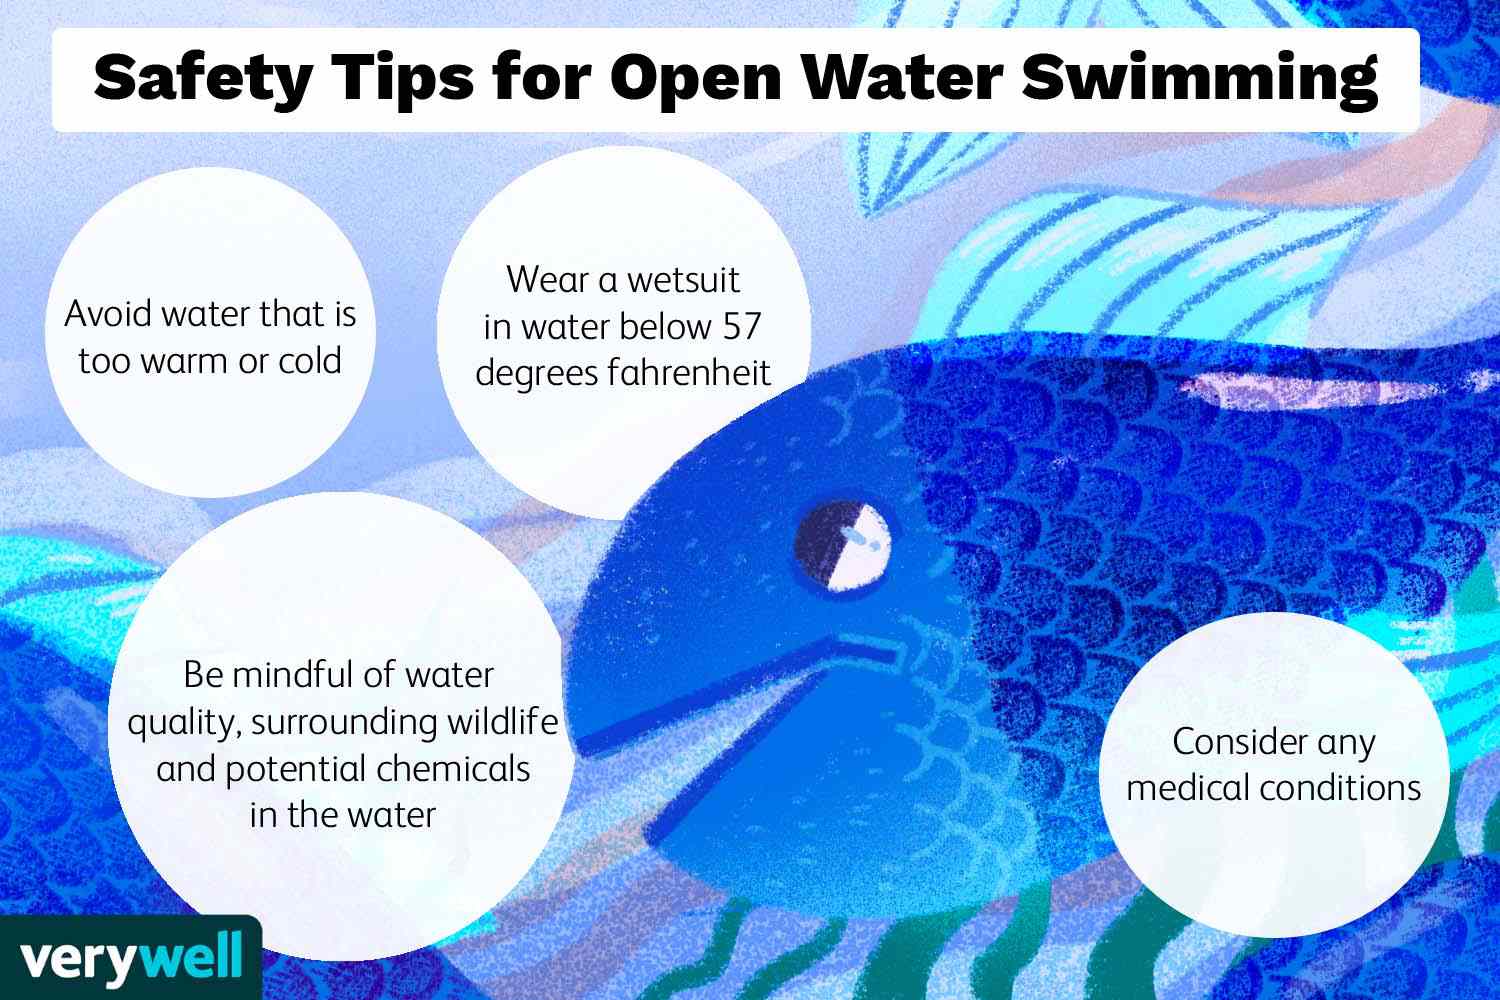 Tips for open water swimming